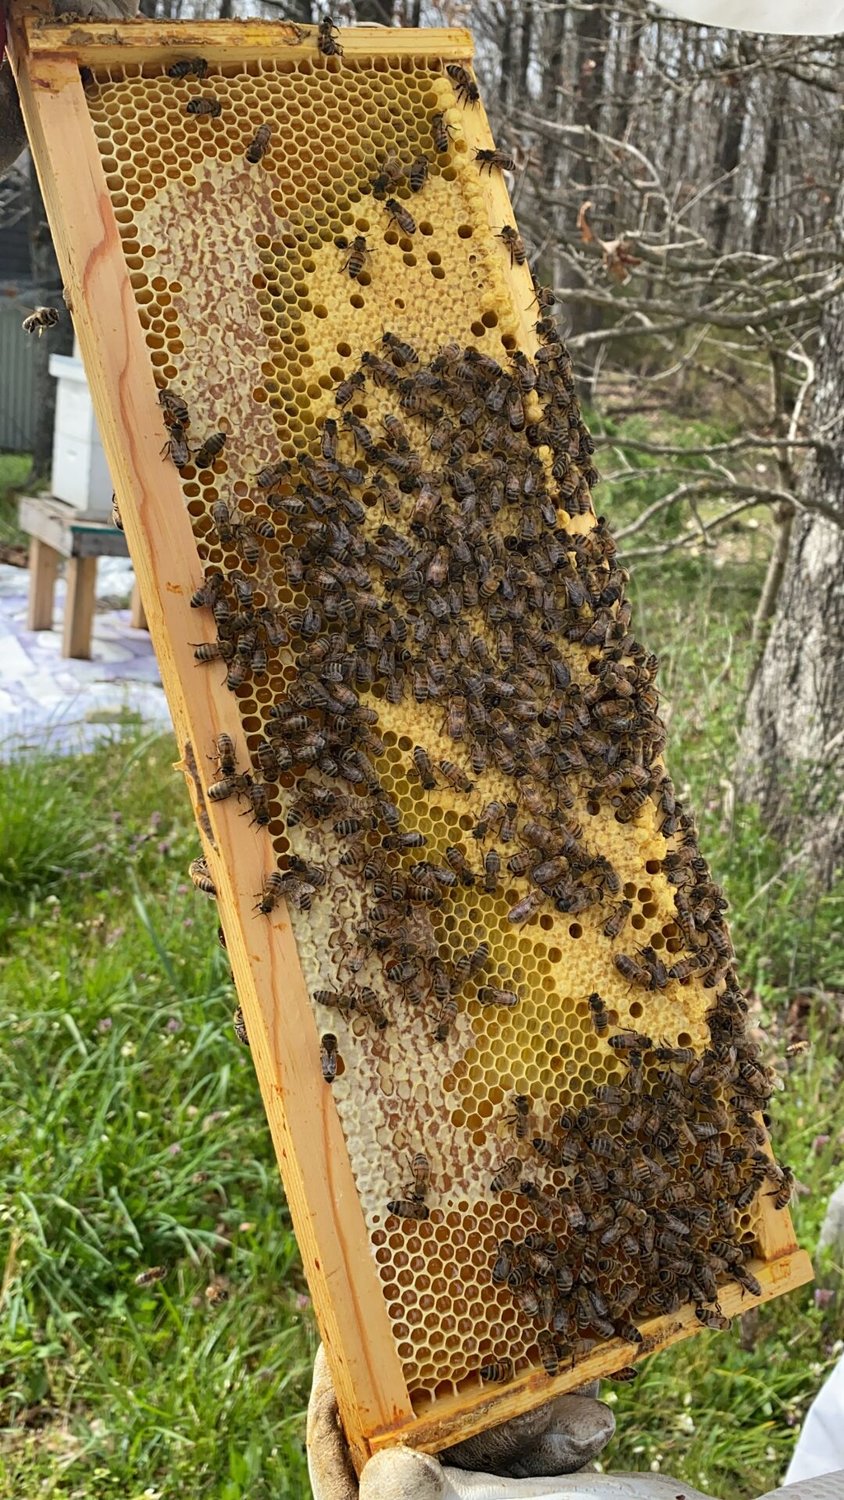 Pictured are octagon shaped honeycomb, which hold more honey than a regular circle would. Bees are fascinating, intelligent creatures who have perfected the most efficient way of producing liquid gold. 